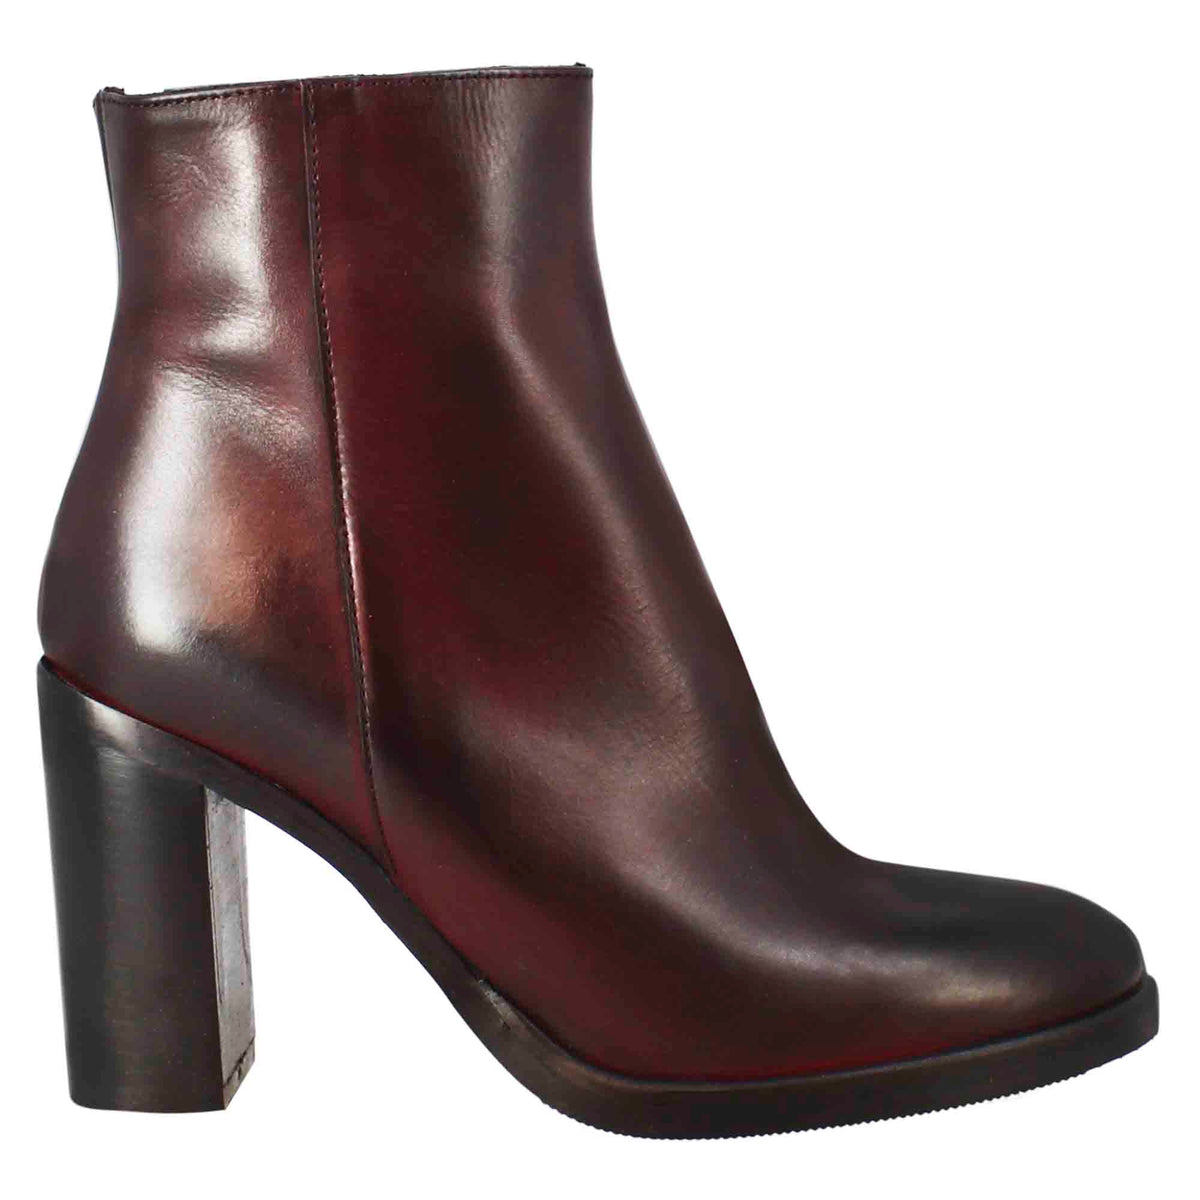 Women's smooth ankle boot with high heel in burgundy leather